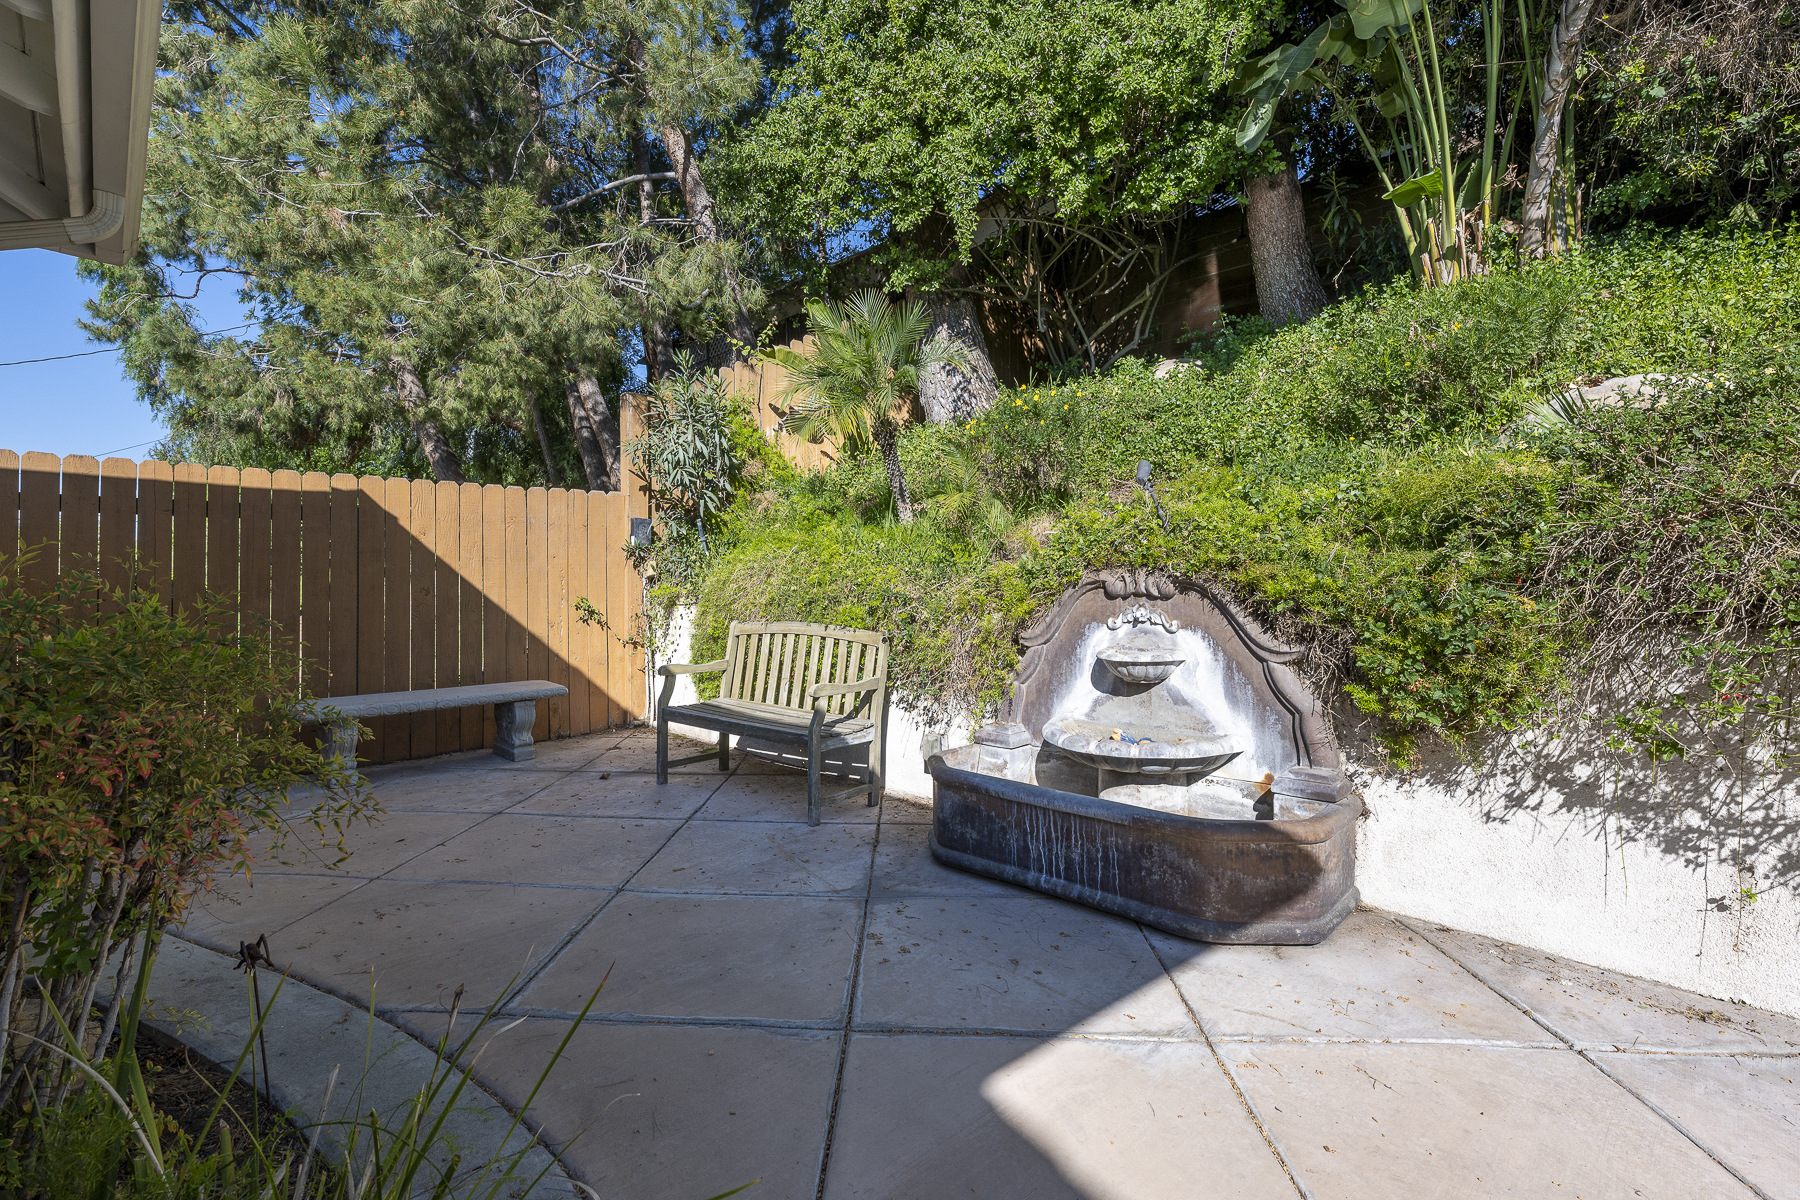 806 N. Adlena Drive, Fullerton, CA 92833: Exterior shot of fountain and benches.